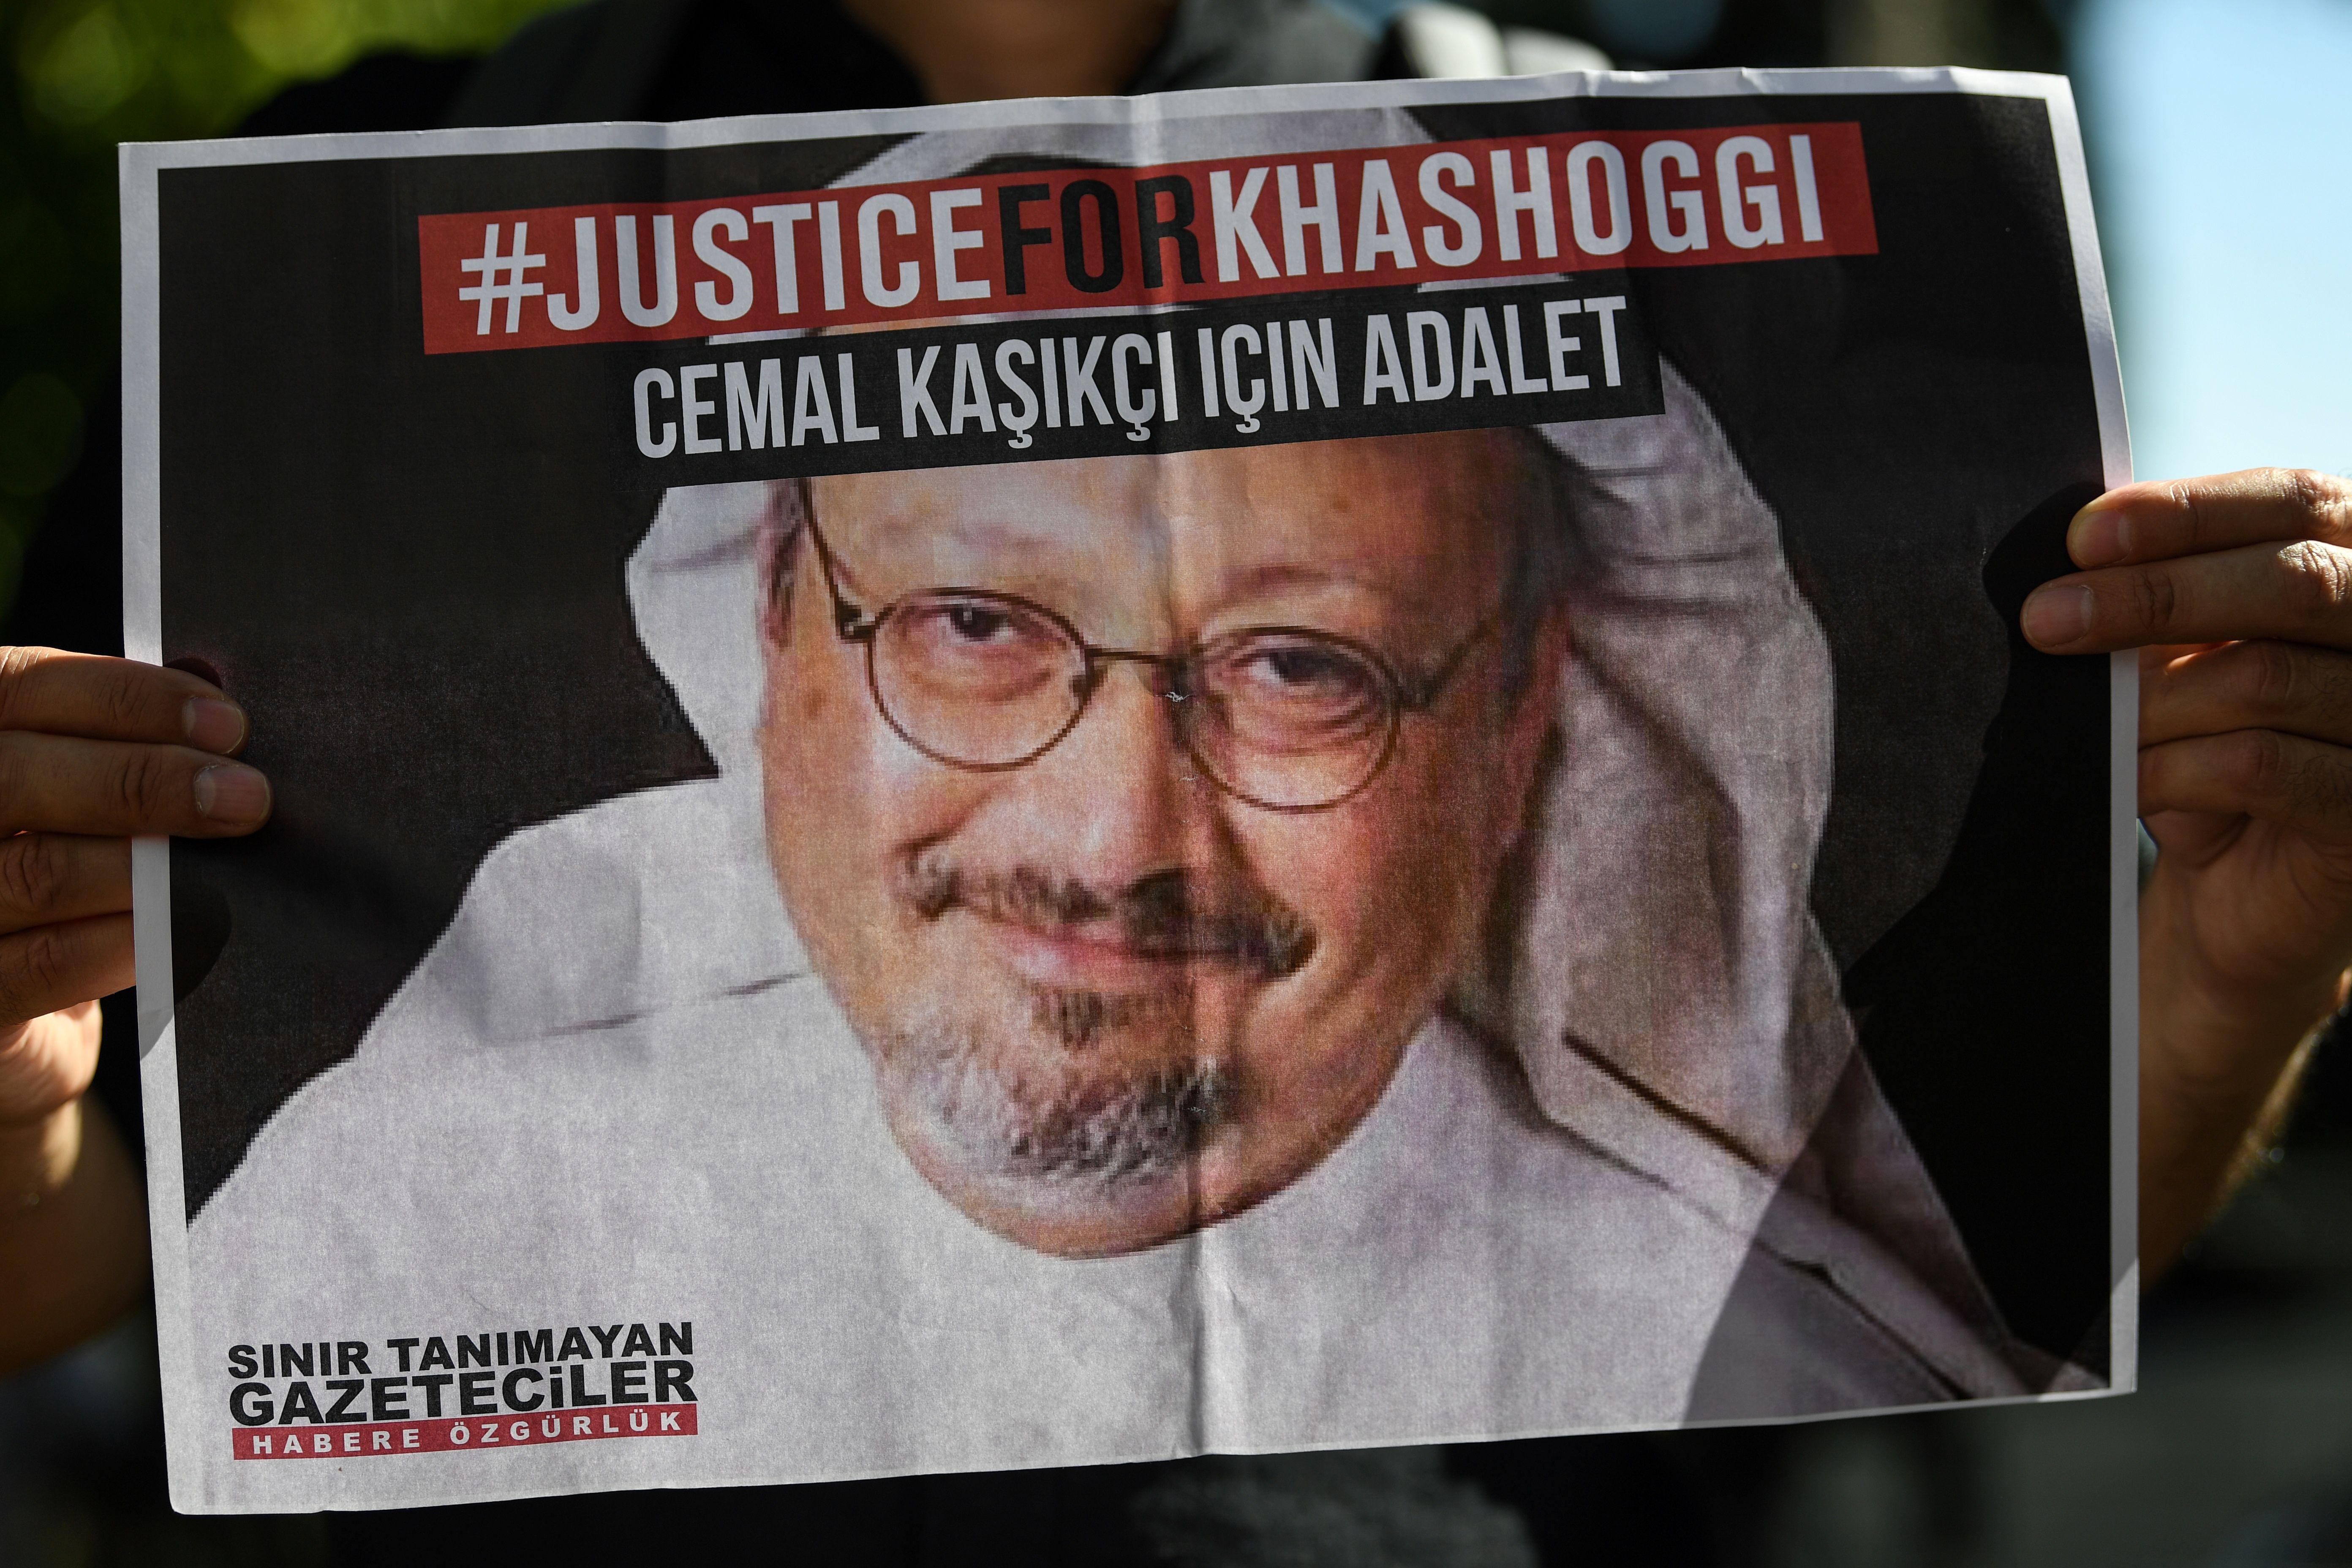 Friends of murdered Saudi journalist Jamal Khashoggi hold posters bearing his picture as they attend an event marking the second-year anniversary of his assassination in front of Saudi Arabia Istanbul Consulate, on October 2, 2020. - Khashoggi, a Washington Post columnist, was killed and dismembered at the Saudi consulate in Istanbul on October 2, 2018, in an operation that reportedly involved 15 agents sent from Riyadh. His remains have not been found. (Photo by Ozan KOSE / AFP) (Photo by OZAN KOSE/AFP via Getty Images)